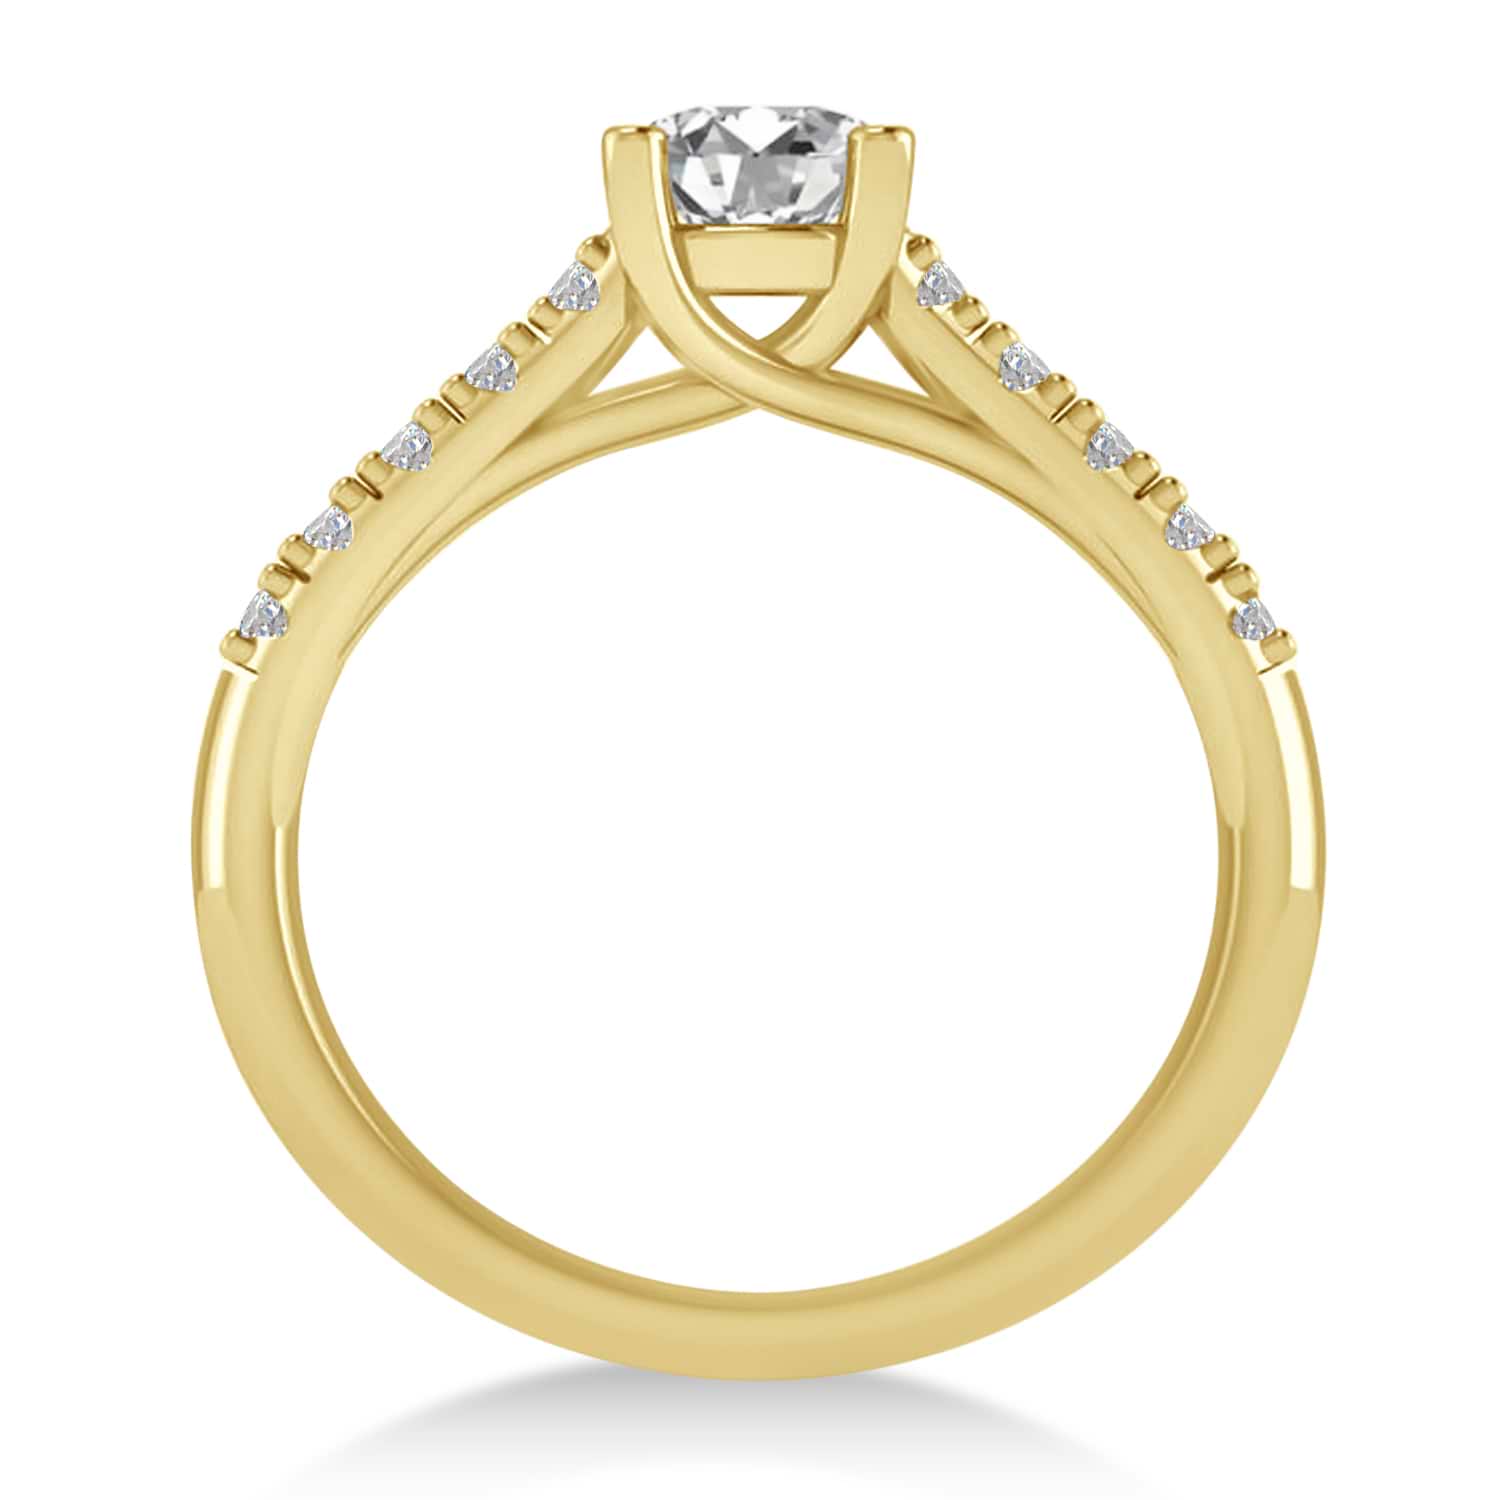 Diamond Accented Pre-Set Engagement Ring 14k Yellow Gold (1.05ct)